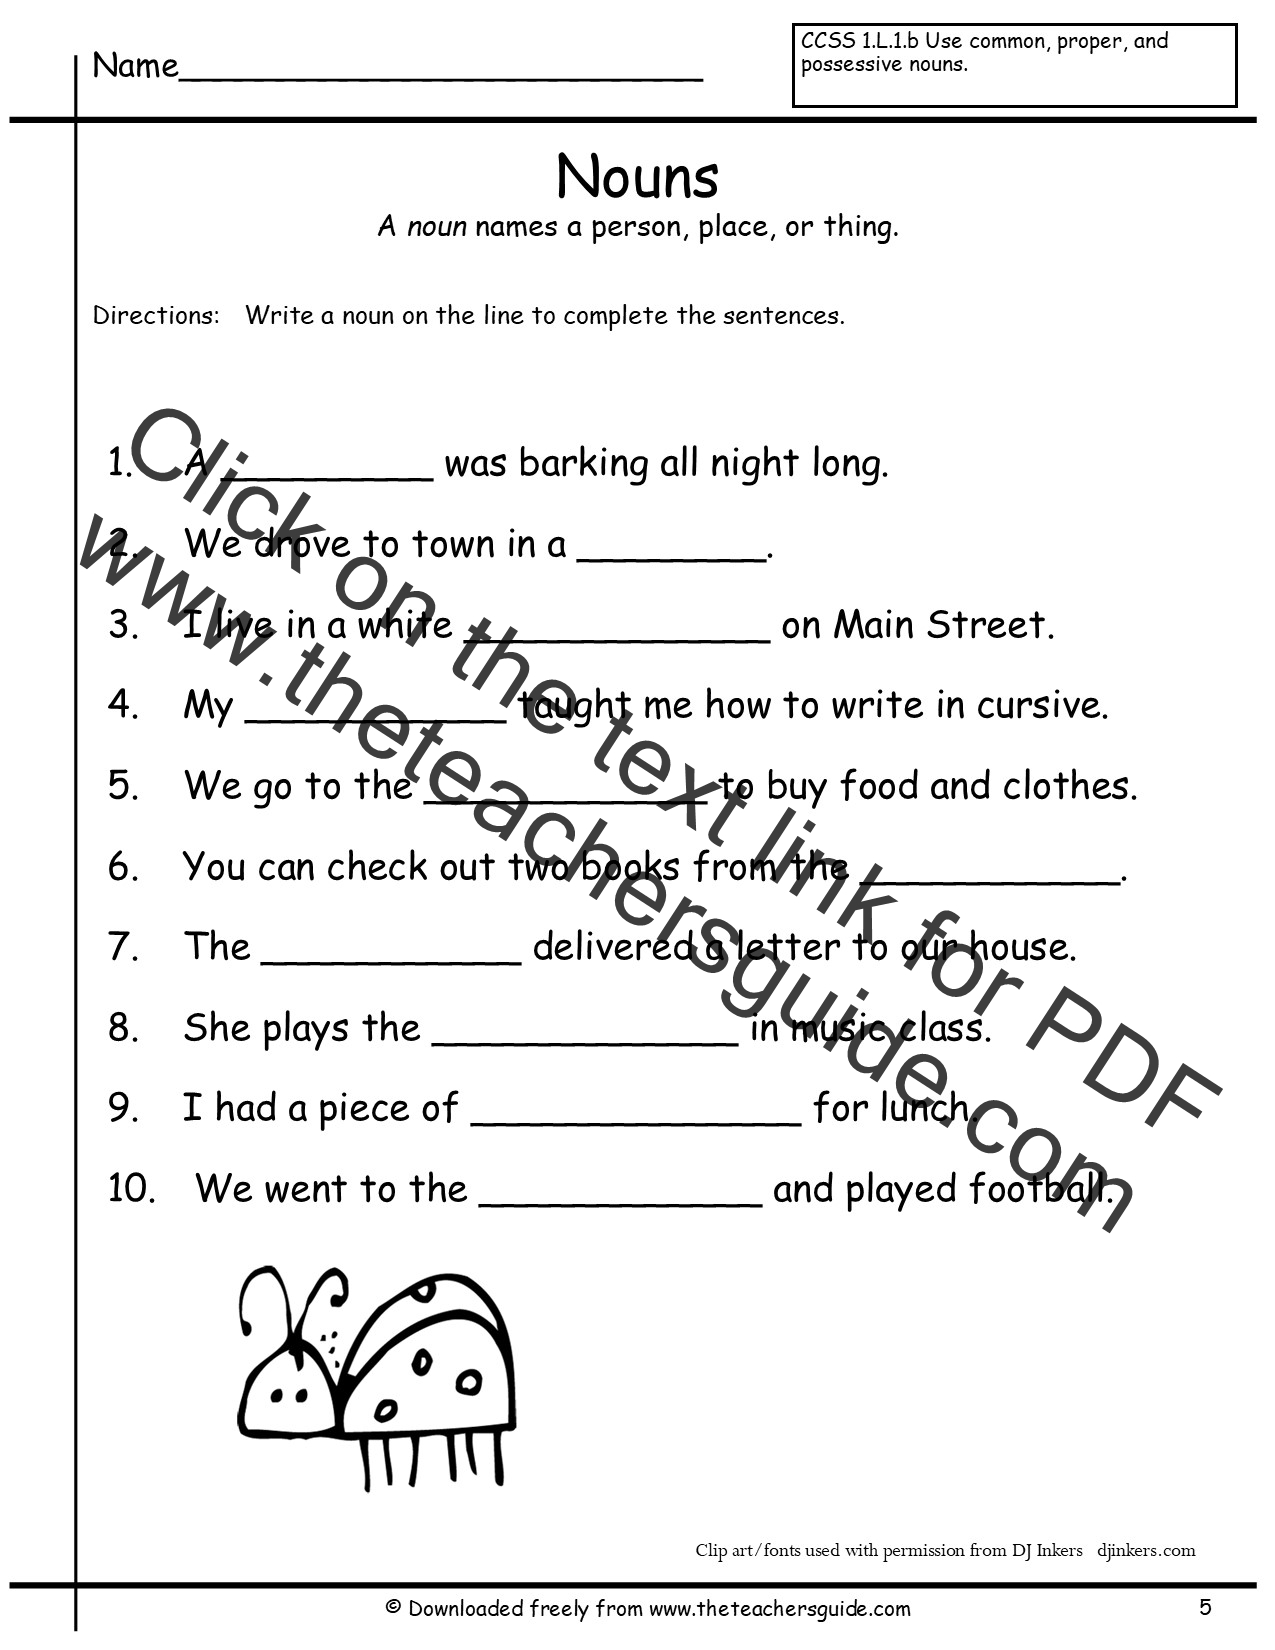 proper-and-common-nouns-printable-worksheets-for-grade-1-kidpid